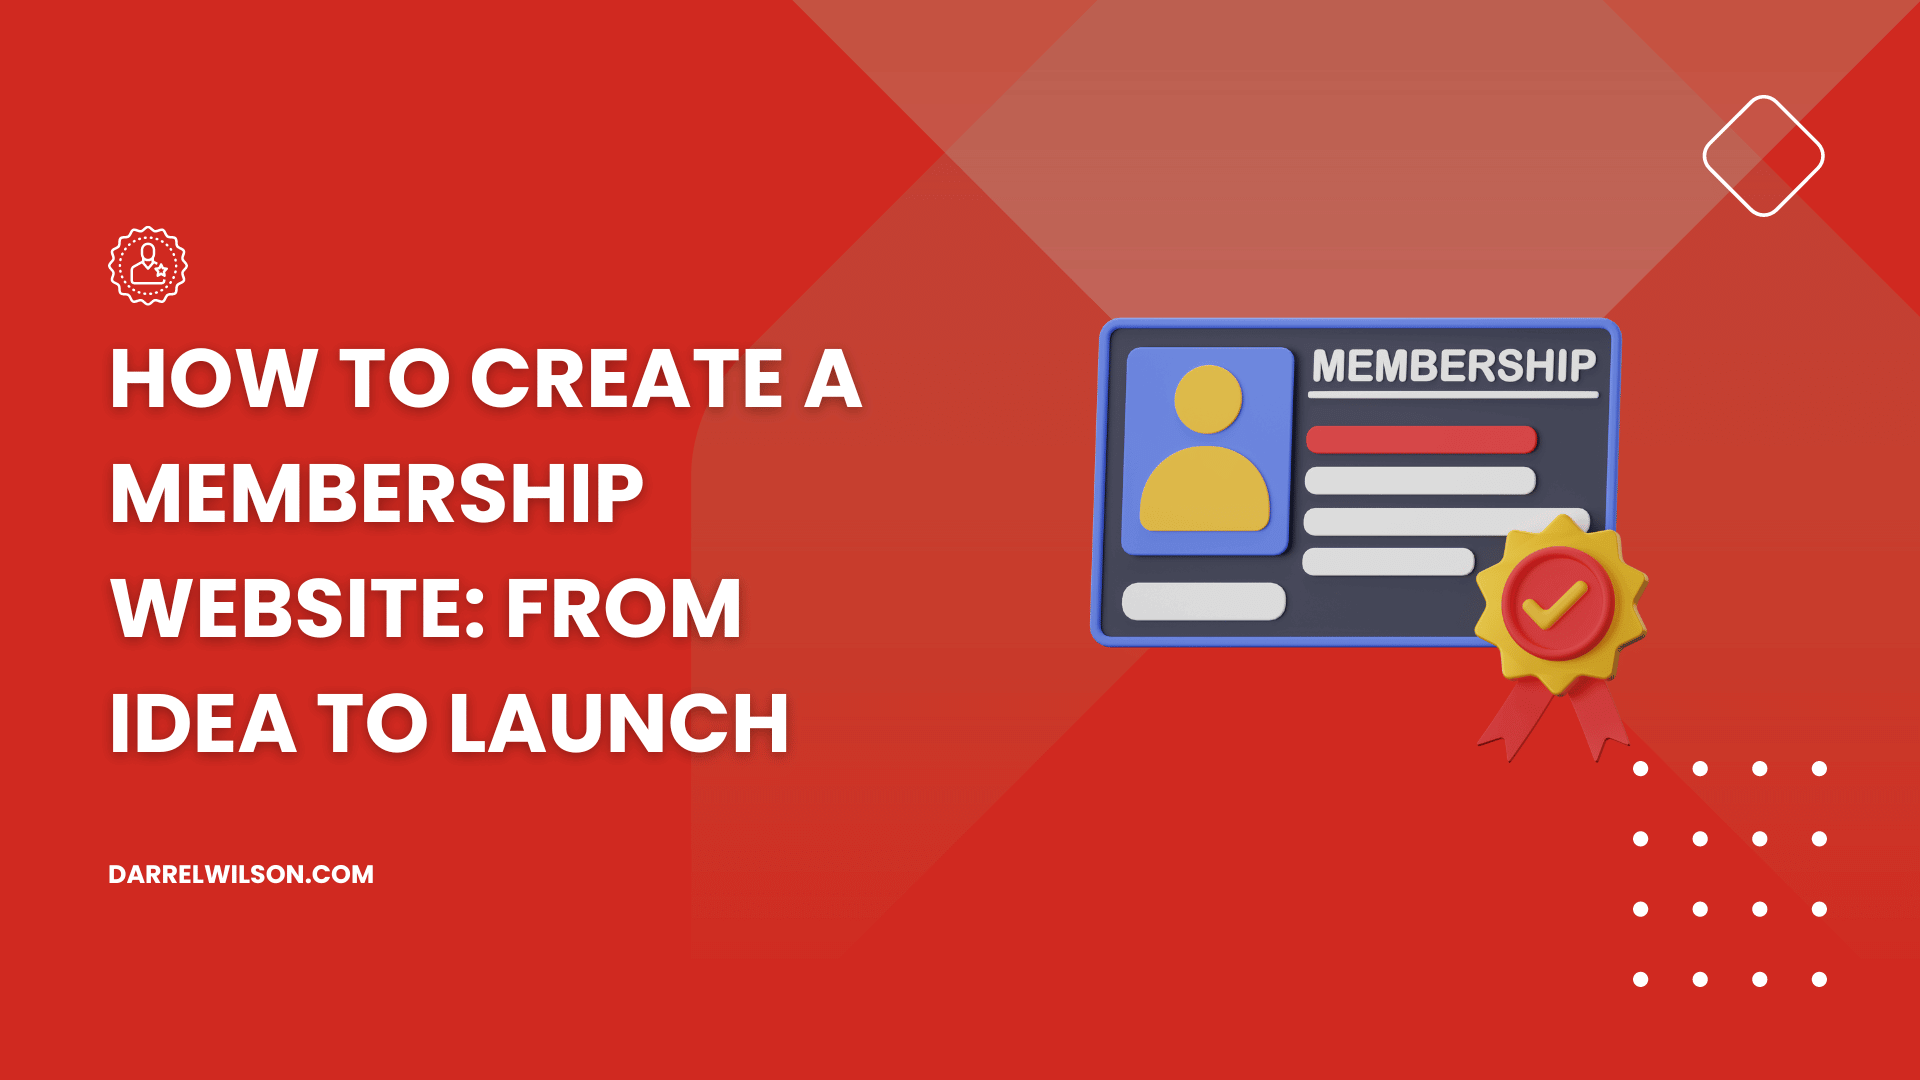 How to Create a Membership Website: From Idea to Launch